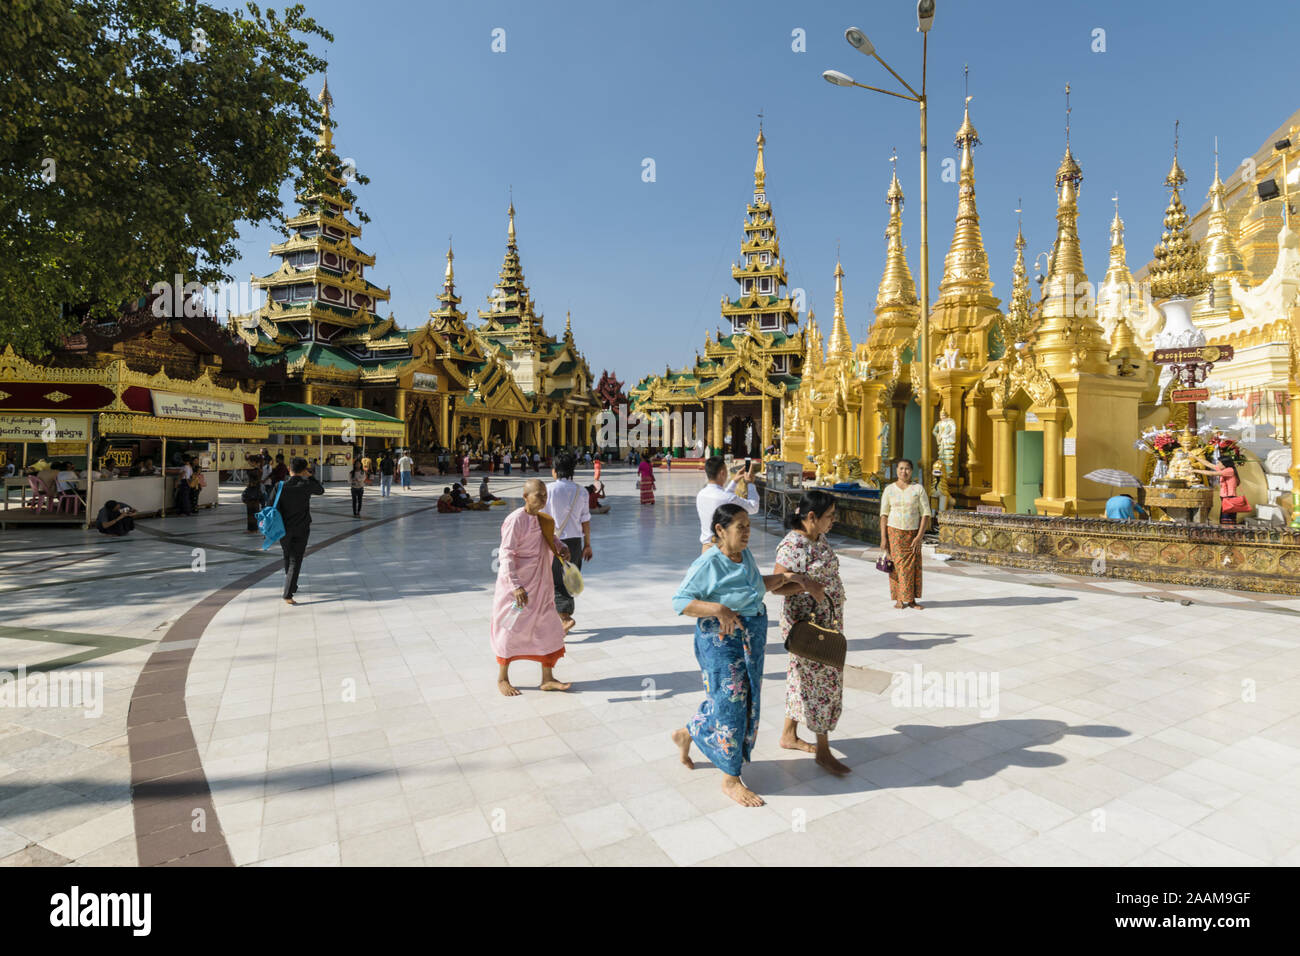 worshippers and tourists at the Shwedagon pagoda site. This Buddhist temple is the most important one in the country. Stock Photo